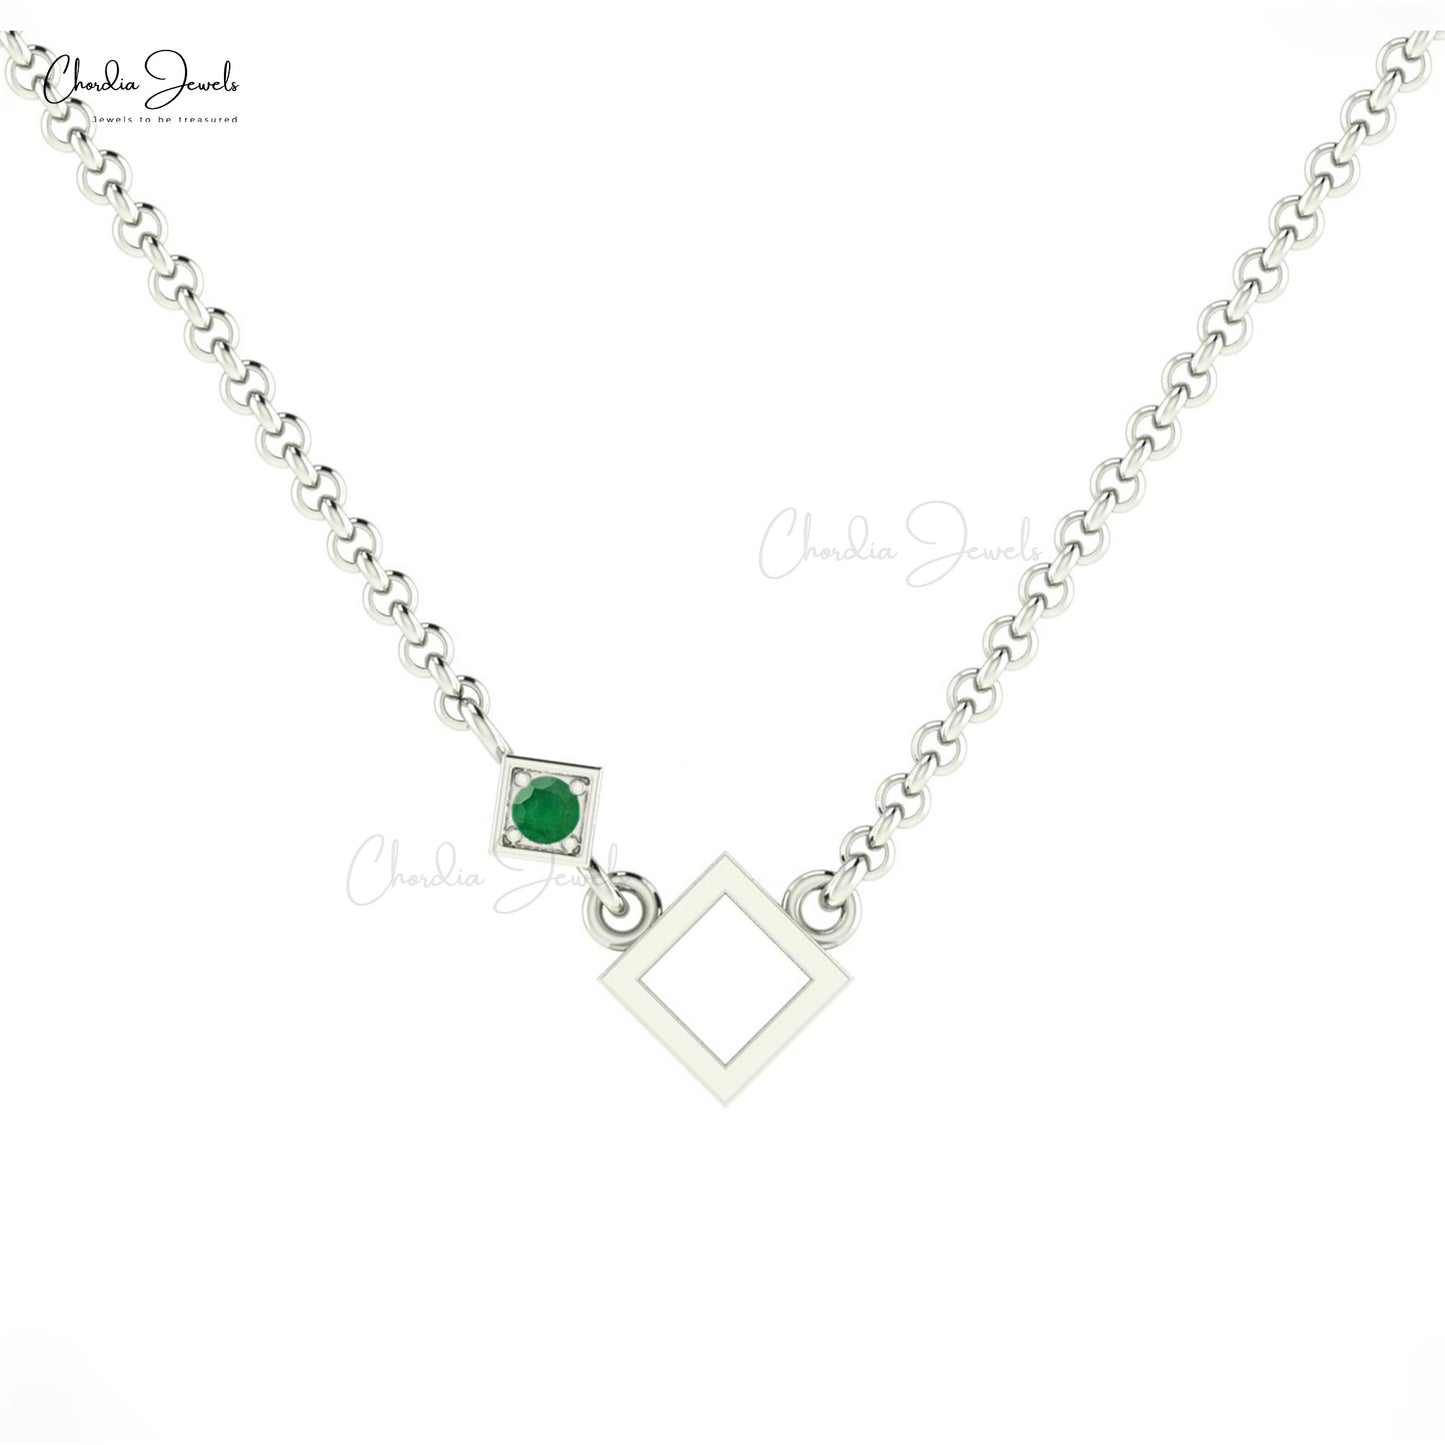 Gift Set Retro Design Square Emerald Green CZ Necklace Matching Earrings  925 Sterling Silver / Gold or Silver Chain / Gift for Her Mom Girl - Etsy